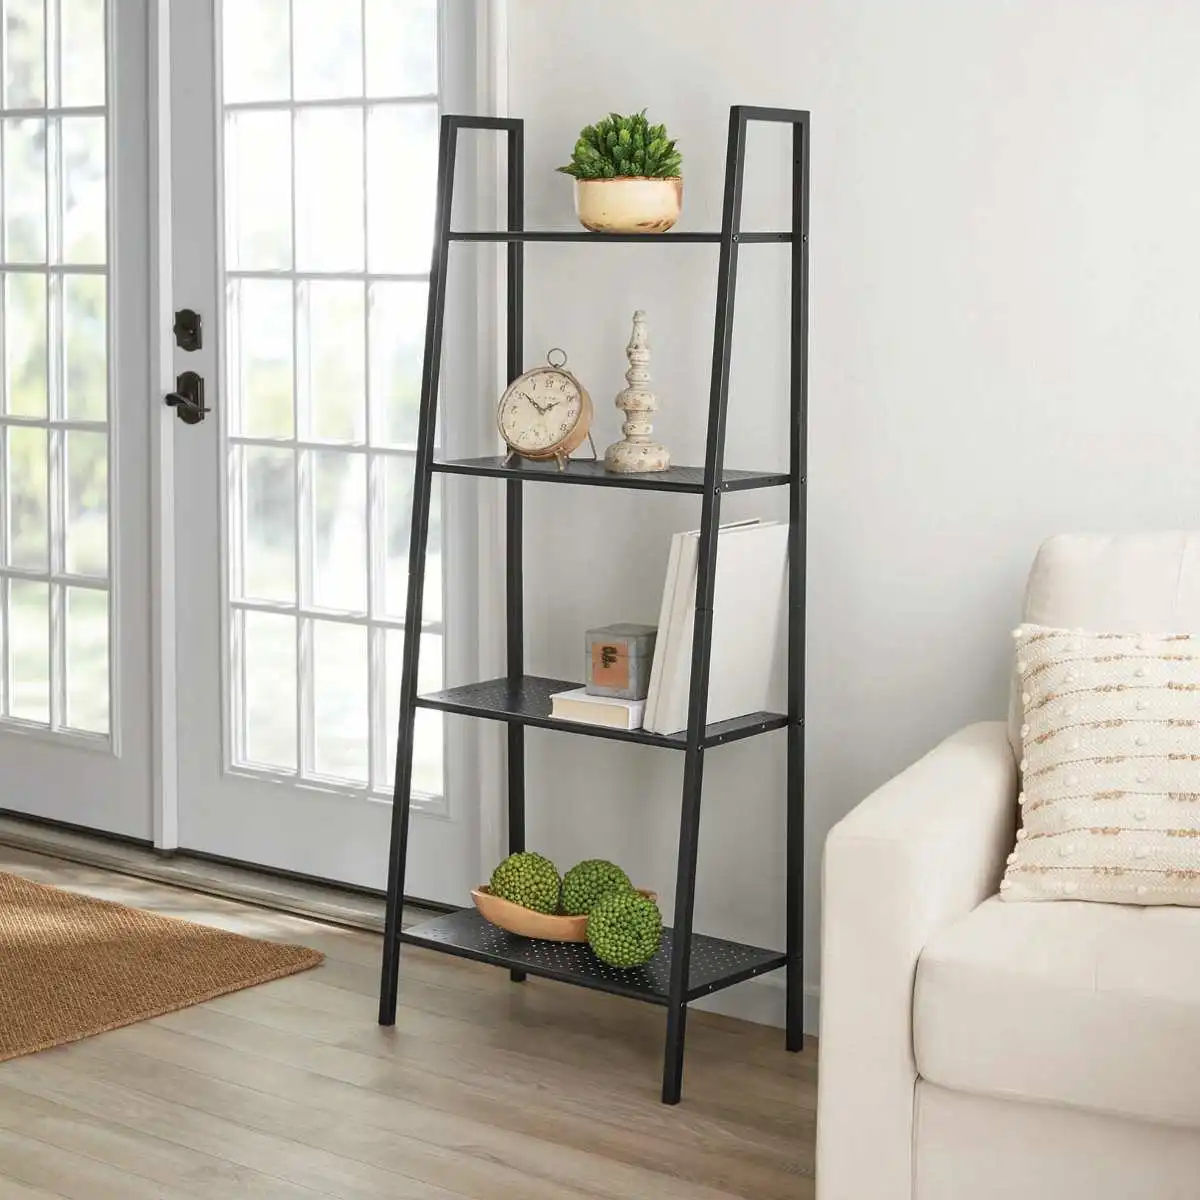 

4 Tiers Wall Leaning Ladder Shelf Bookcase Bookshelf Storage Rack Shelves Storage Stand Unit Organizer for Office Home Bedroom